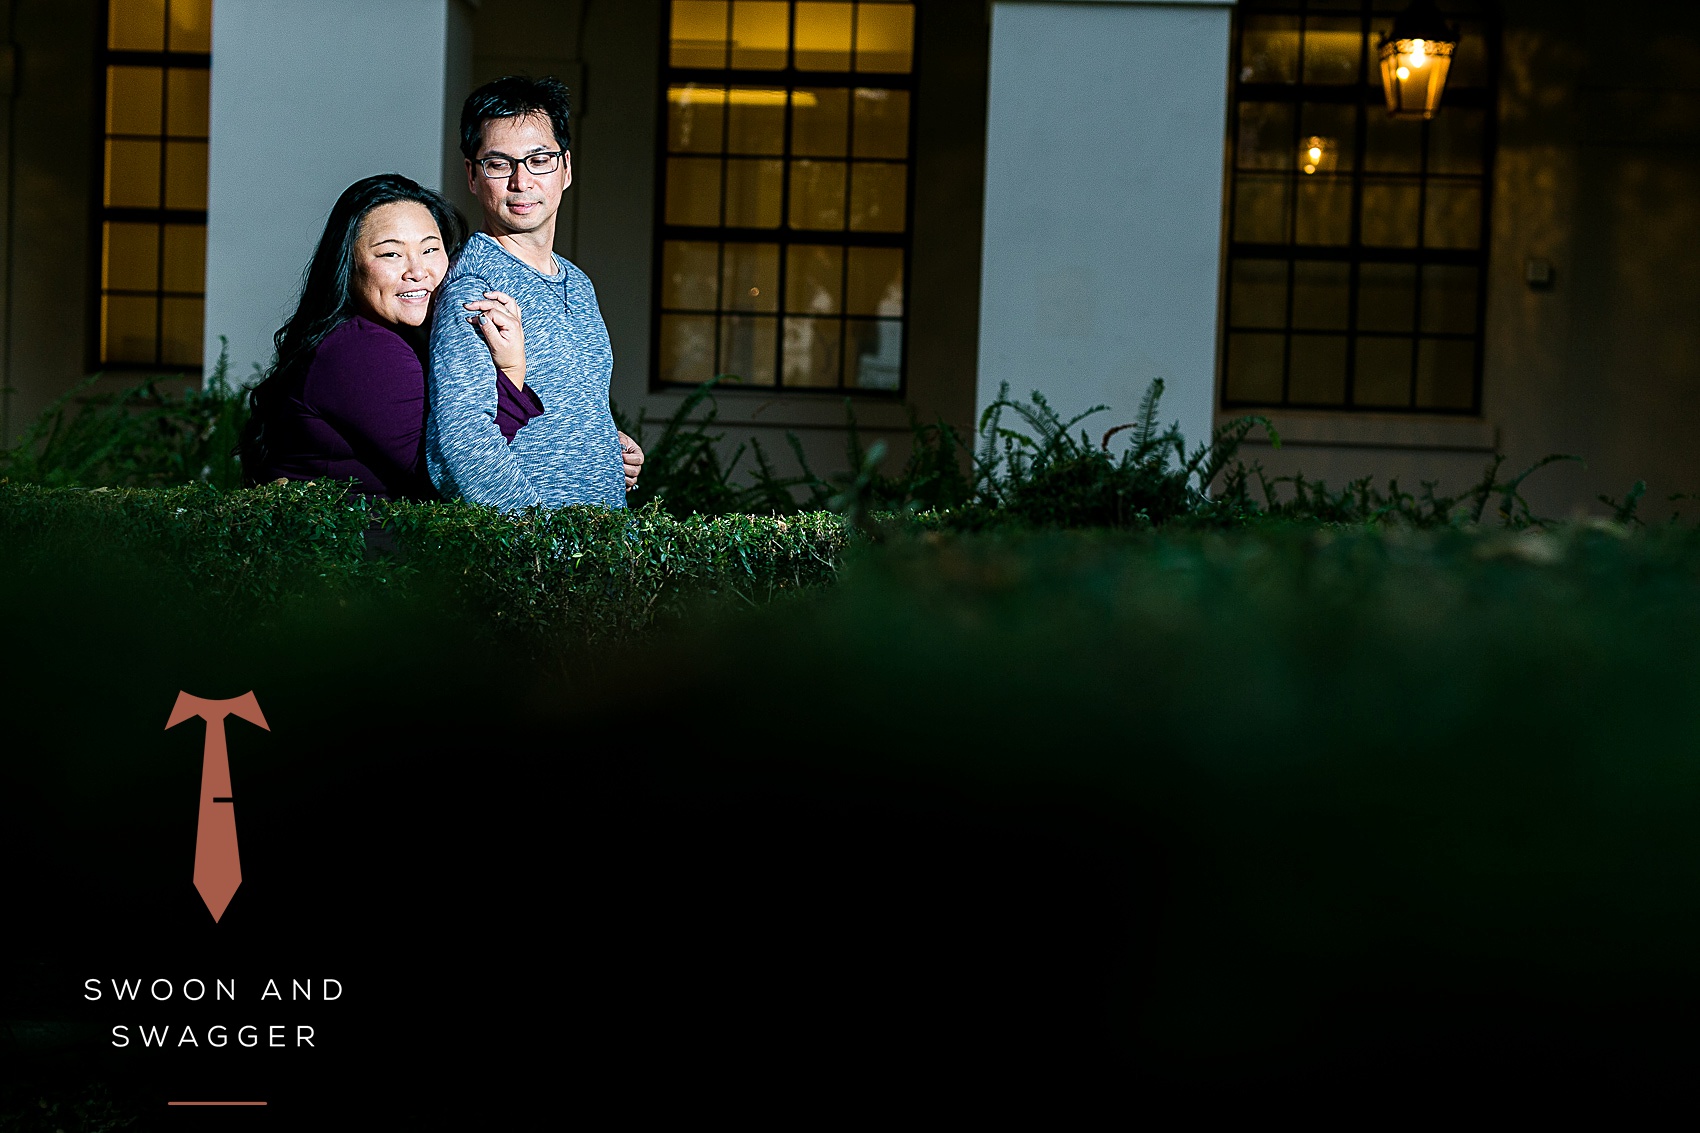 City of Pasadena Engagement Photos Swoon and Swagger